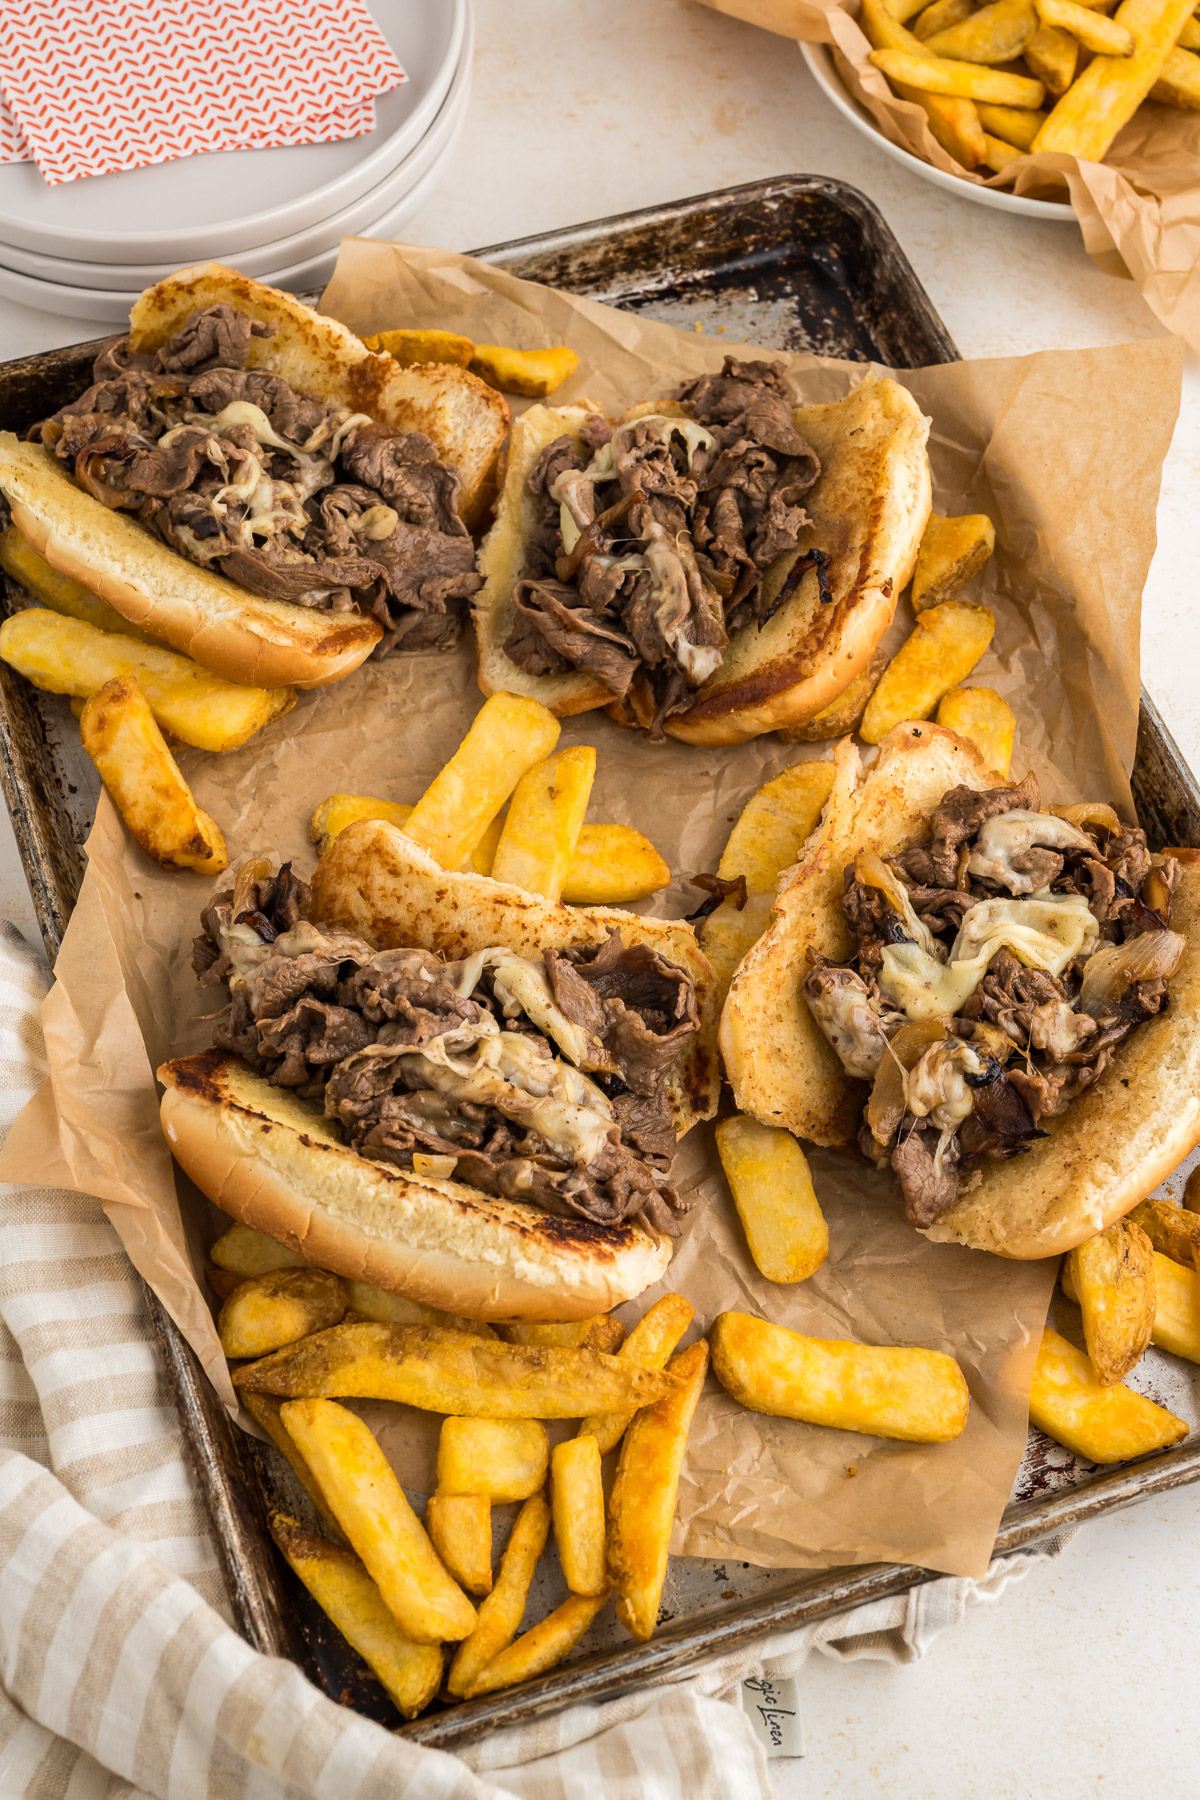 Pan filled with 4 Philly Cheese steak sandwiches with french fries sprinkled around.